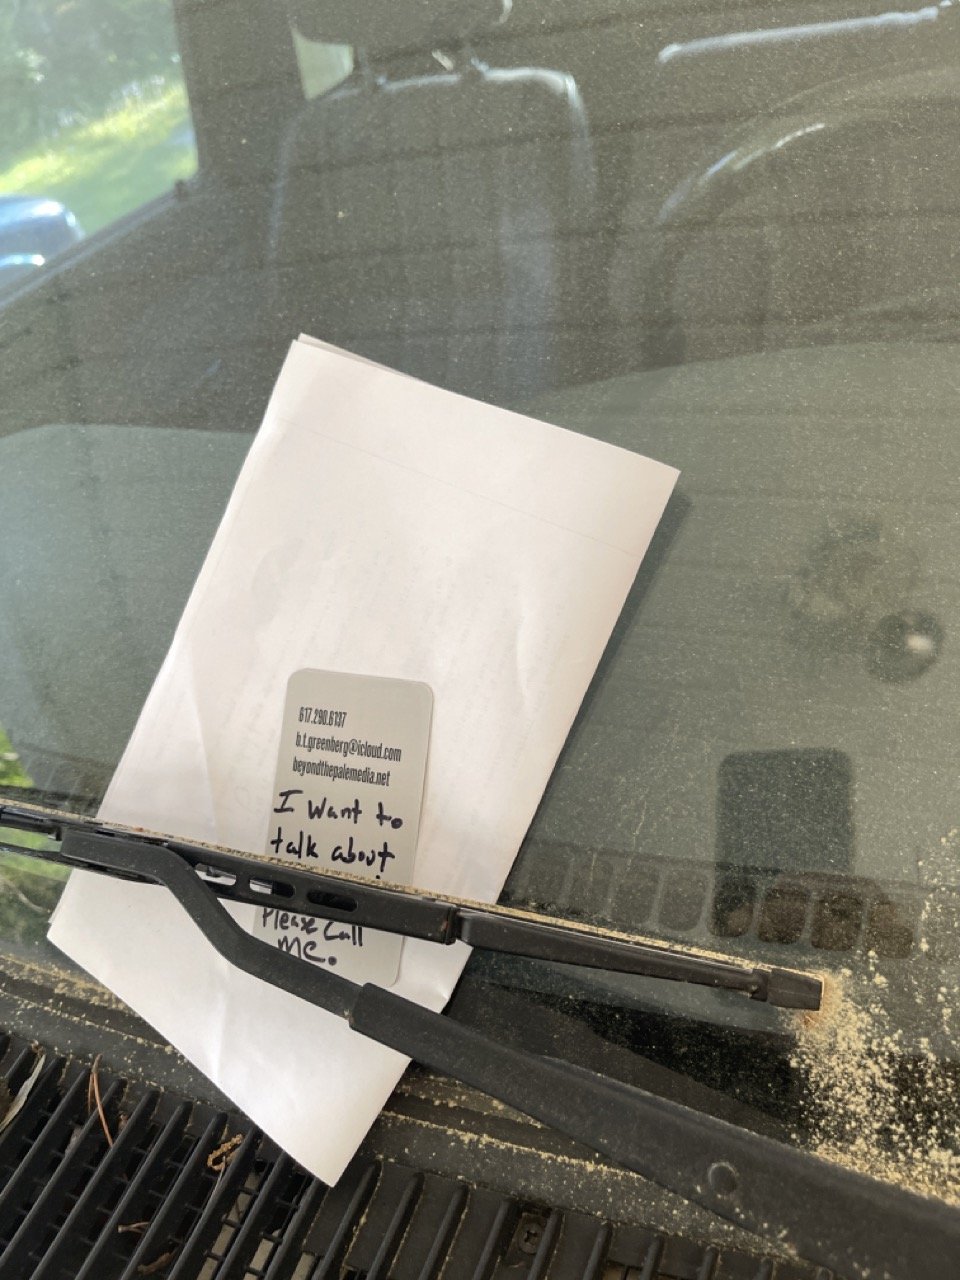  Ben Greenberg's business card and a page from a 1965 witness affidavit left on the windshield of former Ruston, Louisiana police officer Edward Alton Nugent's pickup truck, at his home in Ruston. A note on the business card reads, "I want to talk ab